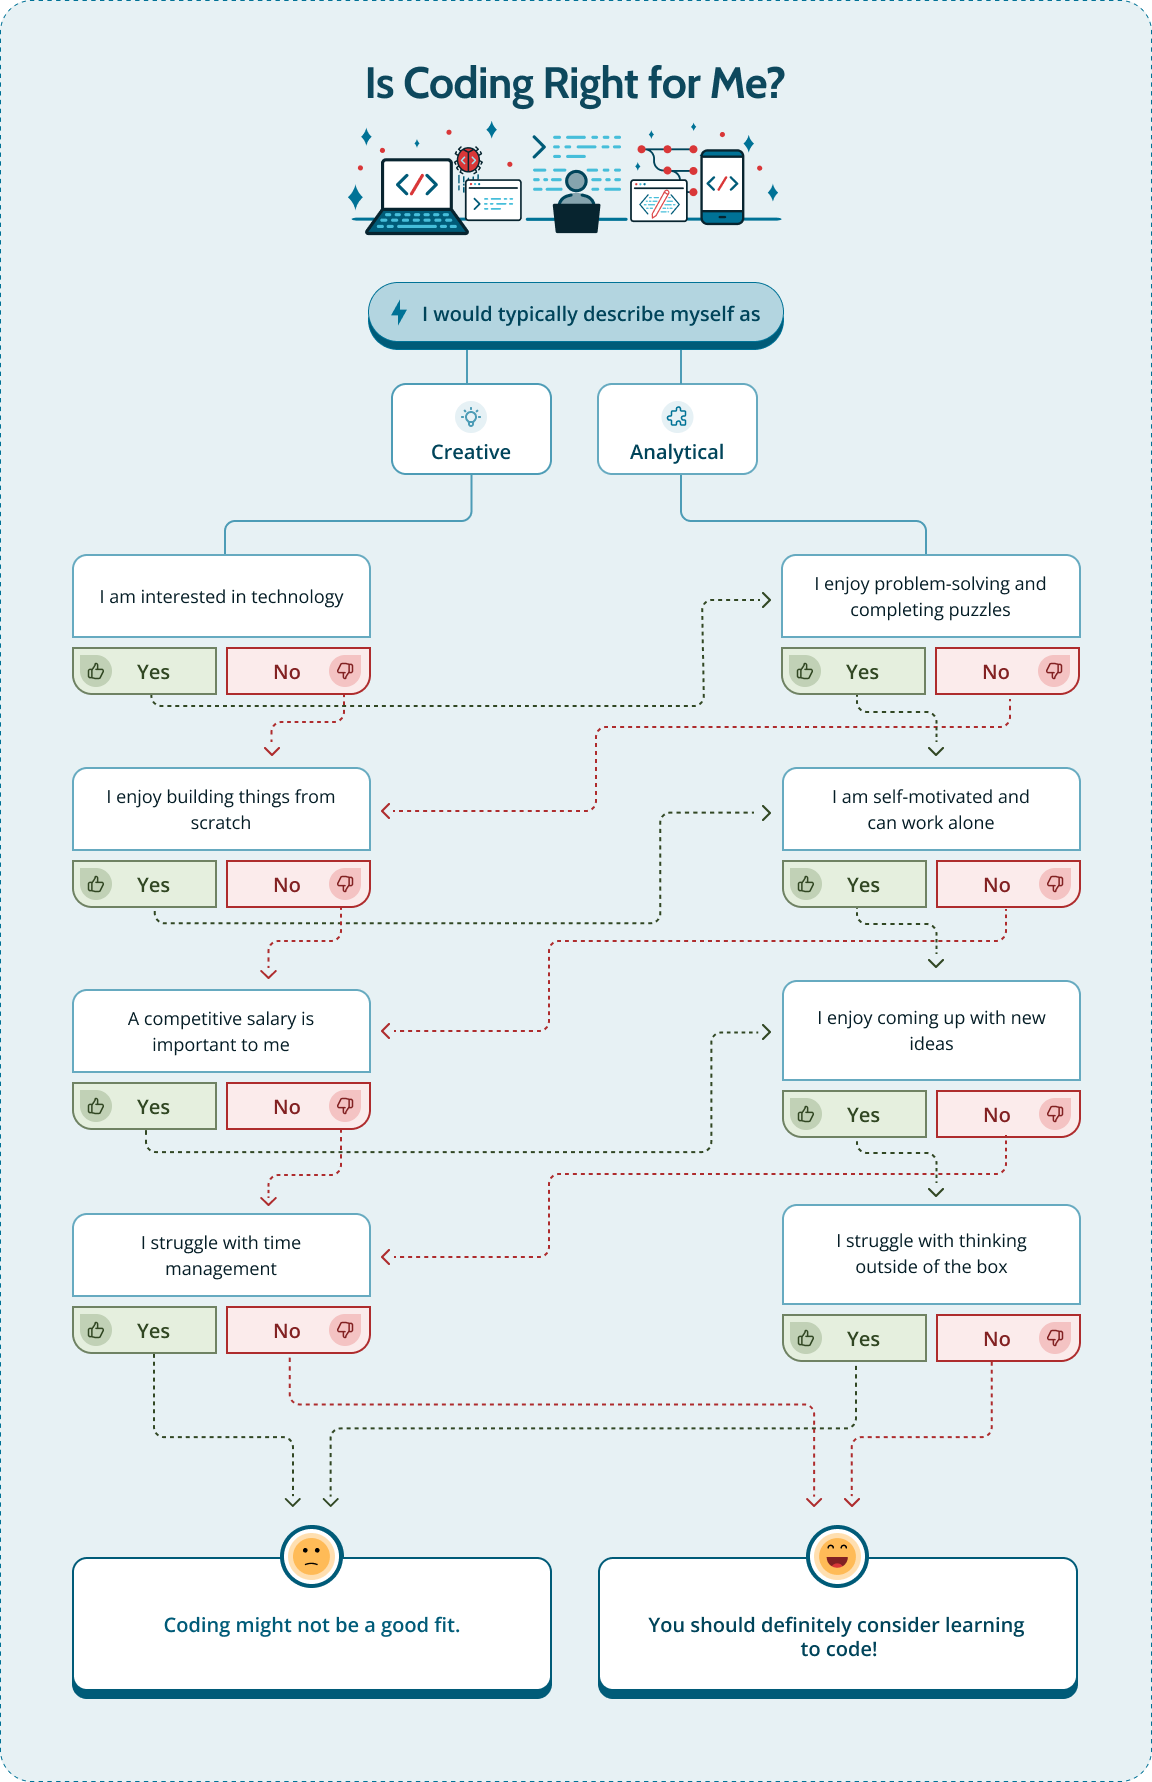 Decision tree to help people decide whether a coding career is right for them. Analytical people who are interested in technology and enjoy problem-solving, coming up with new ideas, and thinking outside the box would likely enjoy coding.